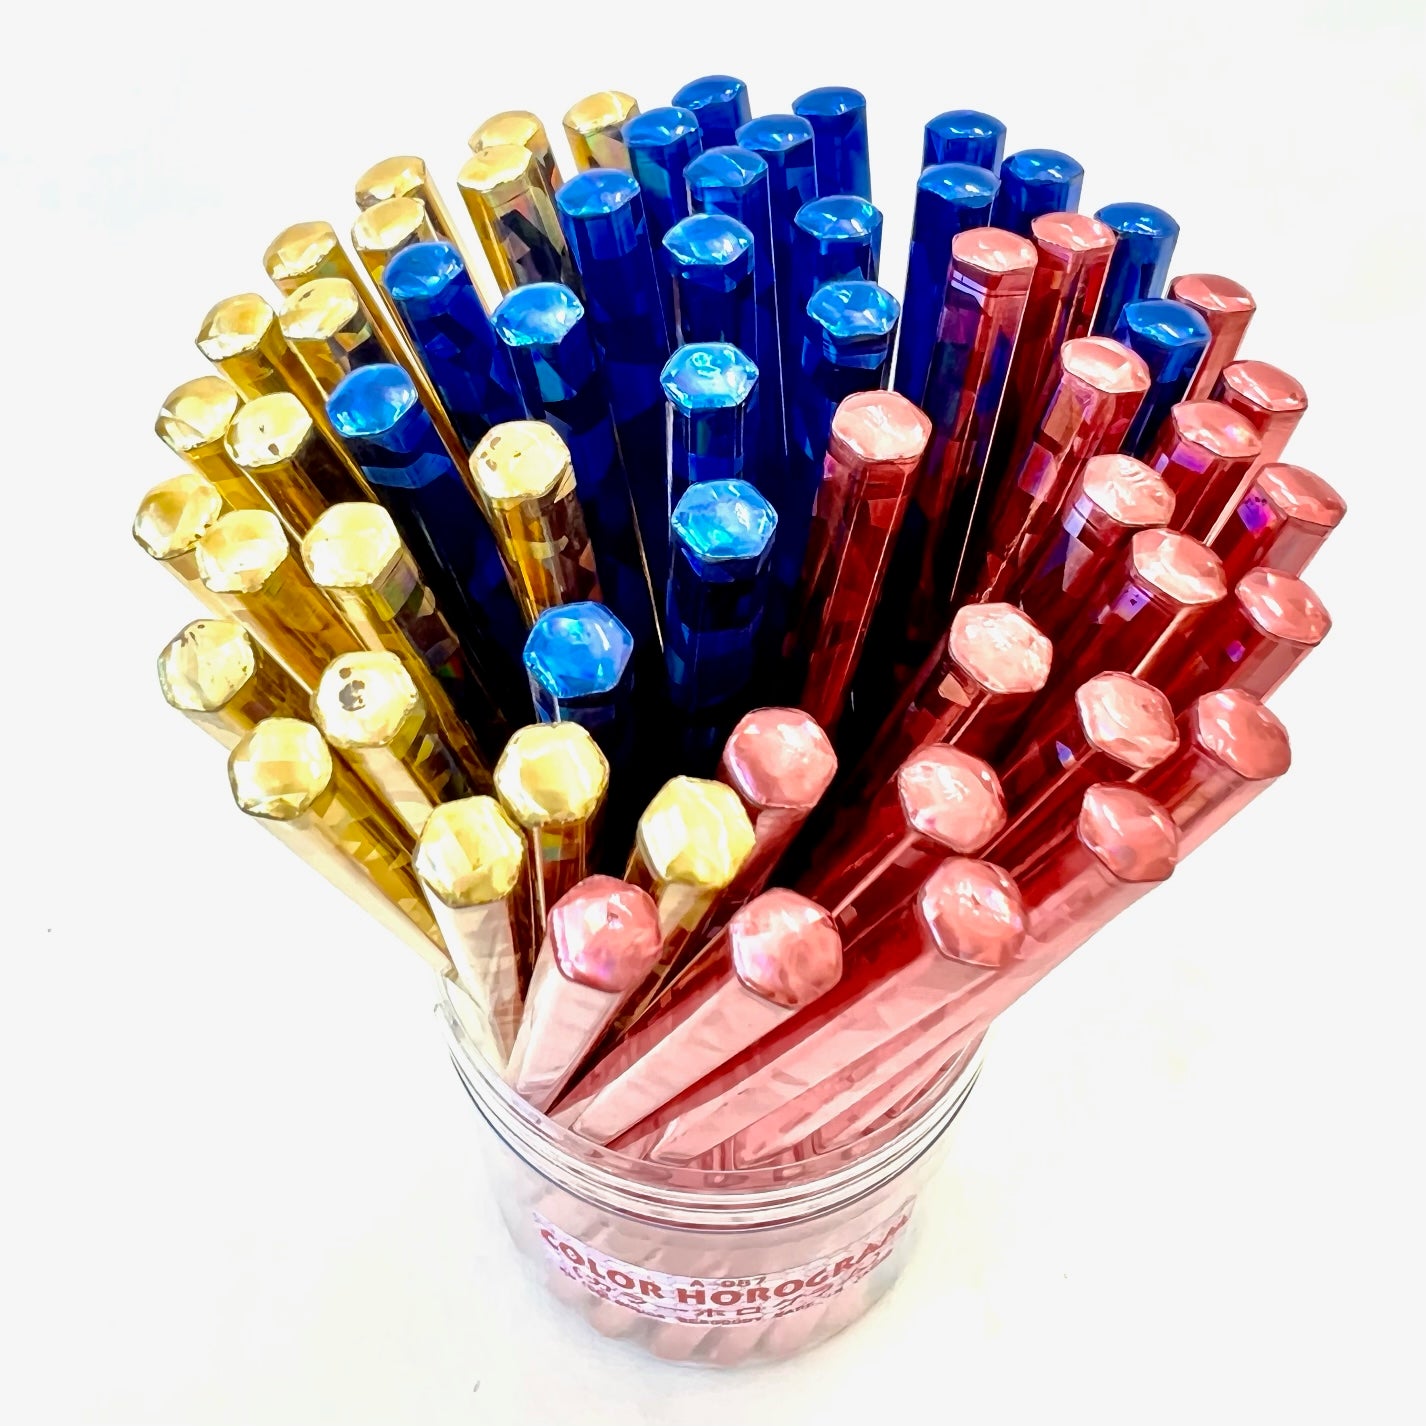  Holographic Pencils with Erasers Metallic Assorted Colors  Wooden Glitter Pencils Optical Illusion Pencils HB Pencils (36 Pieces) :  Office Products